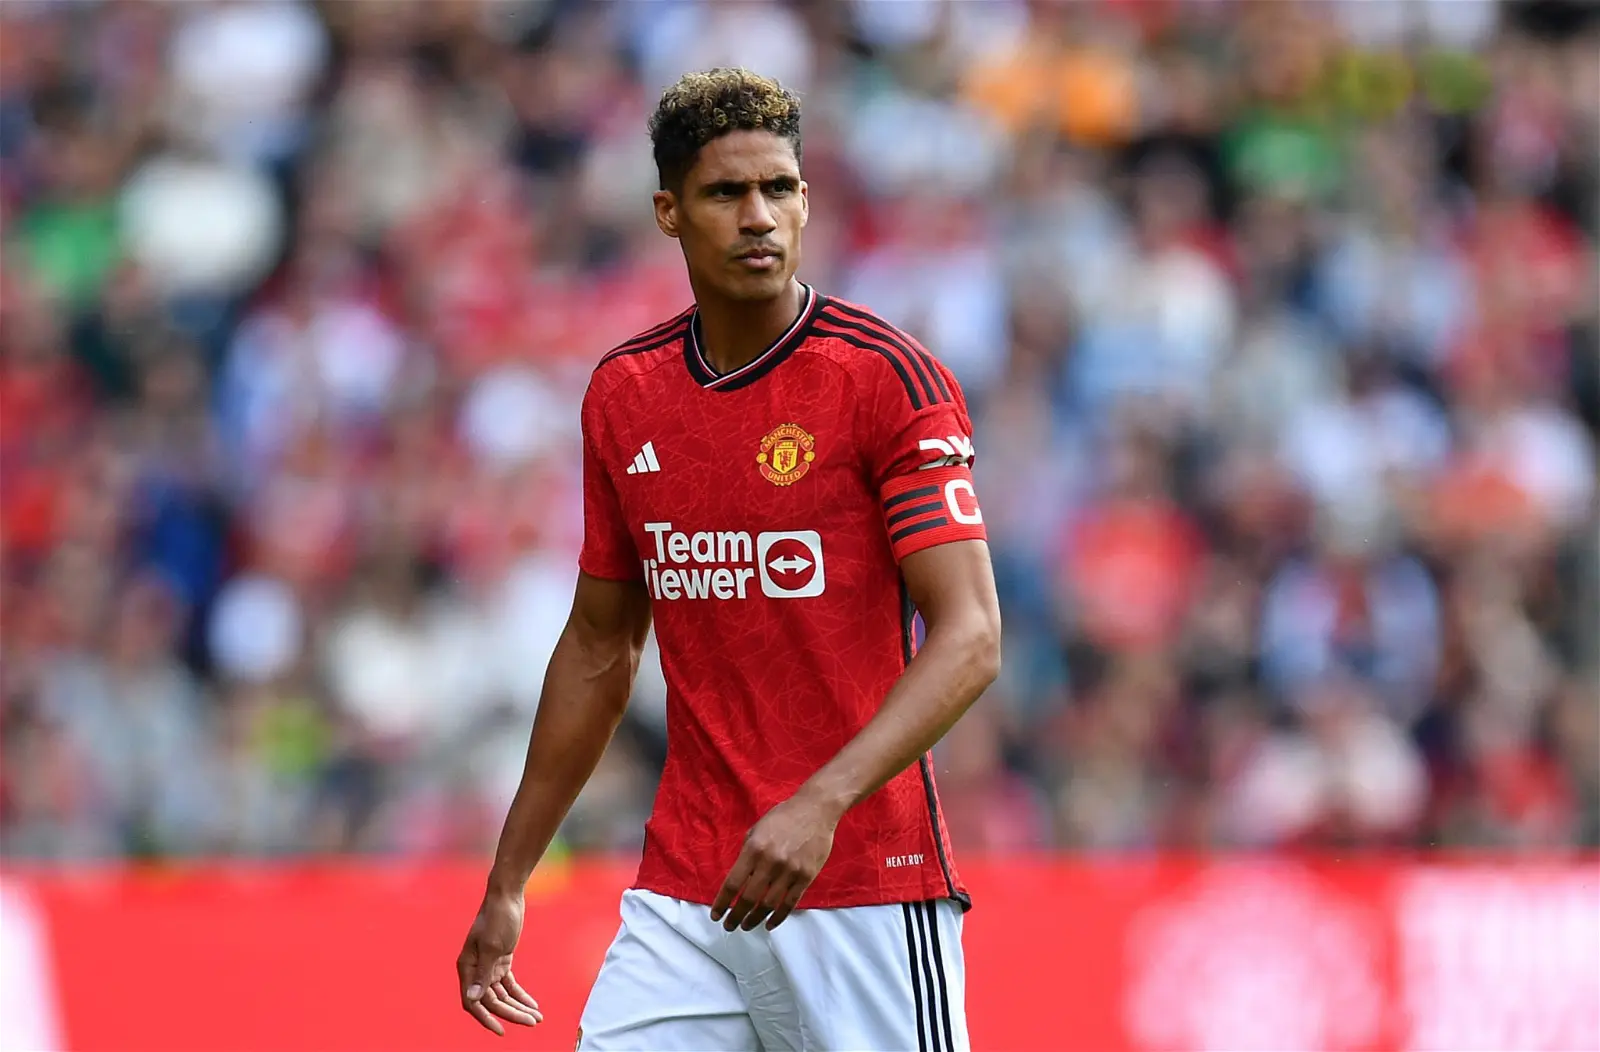 UCL: Manchester United can win Champions League title – Varane